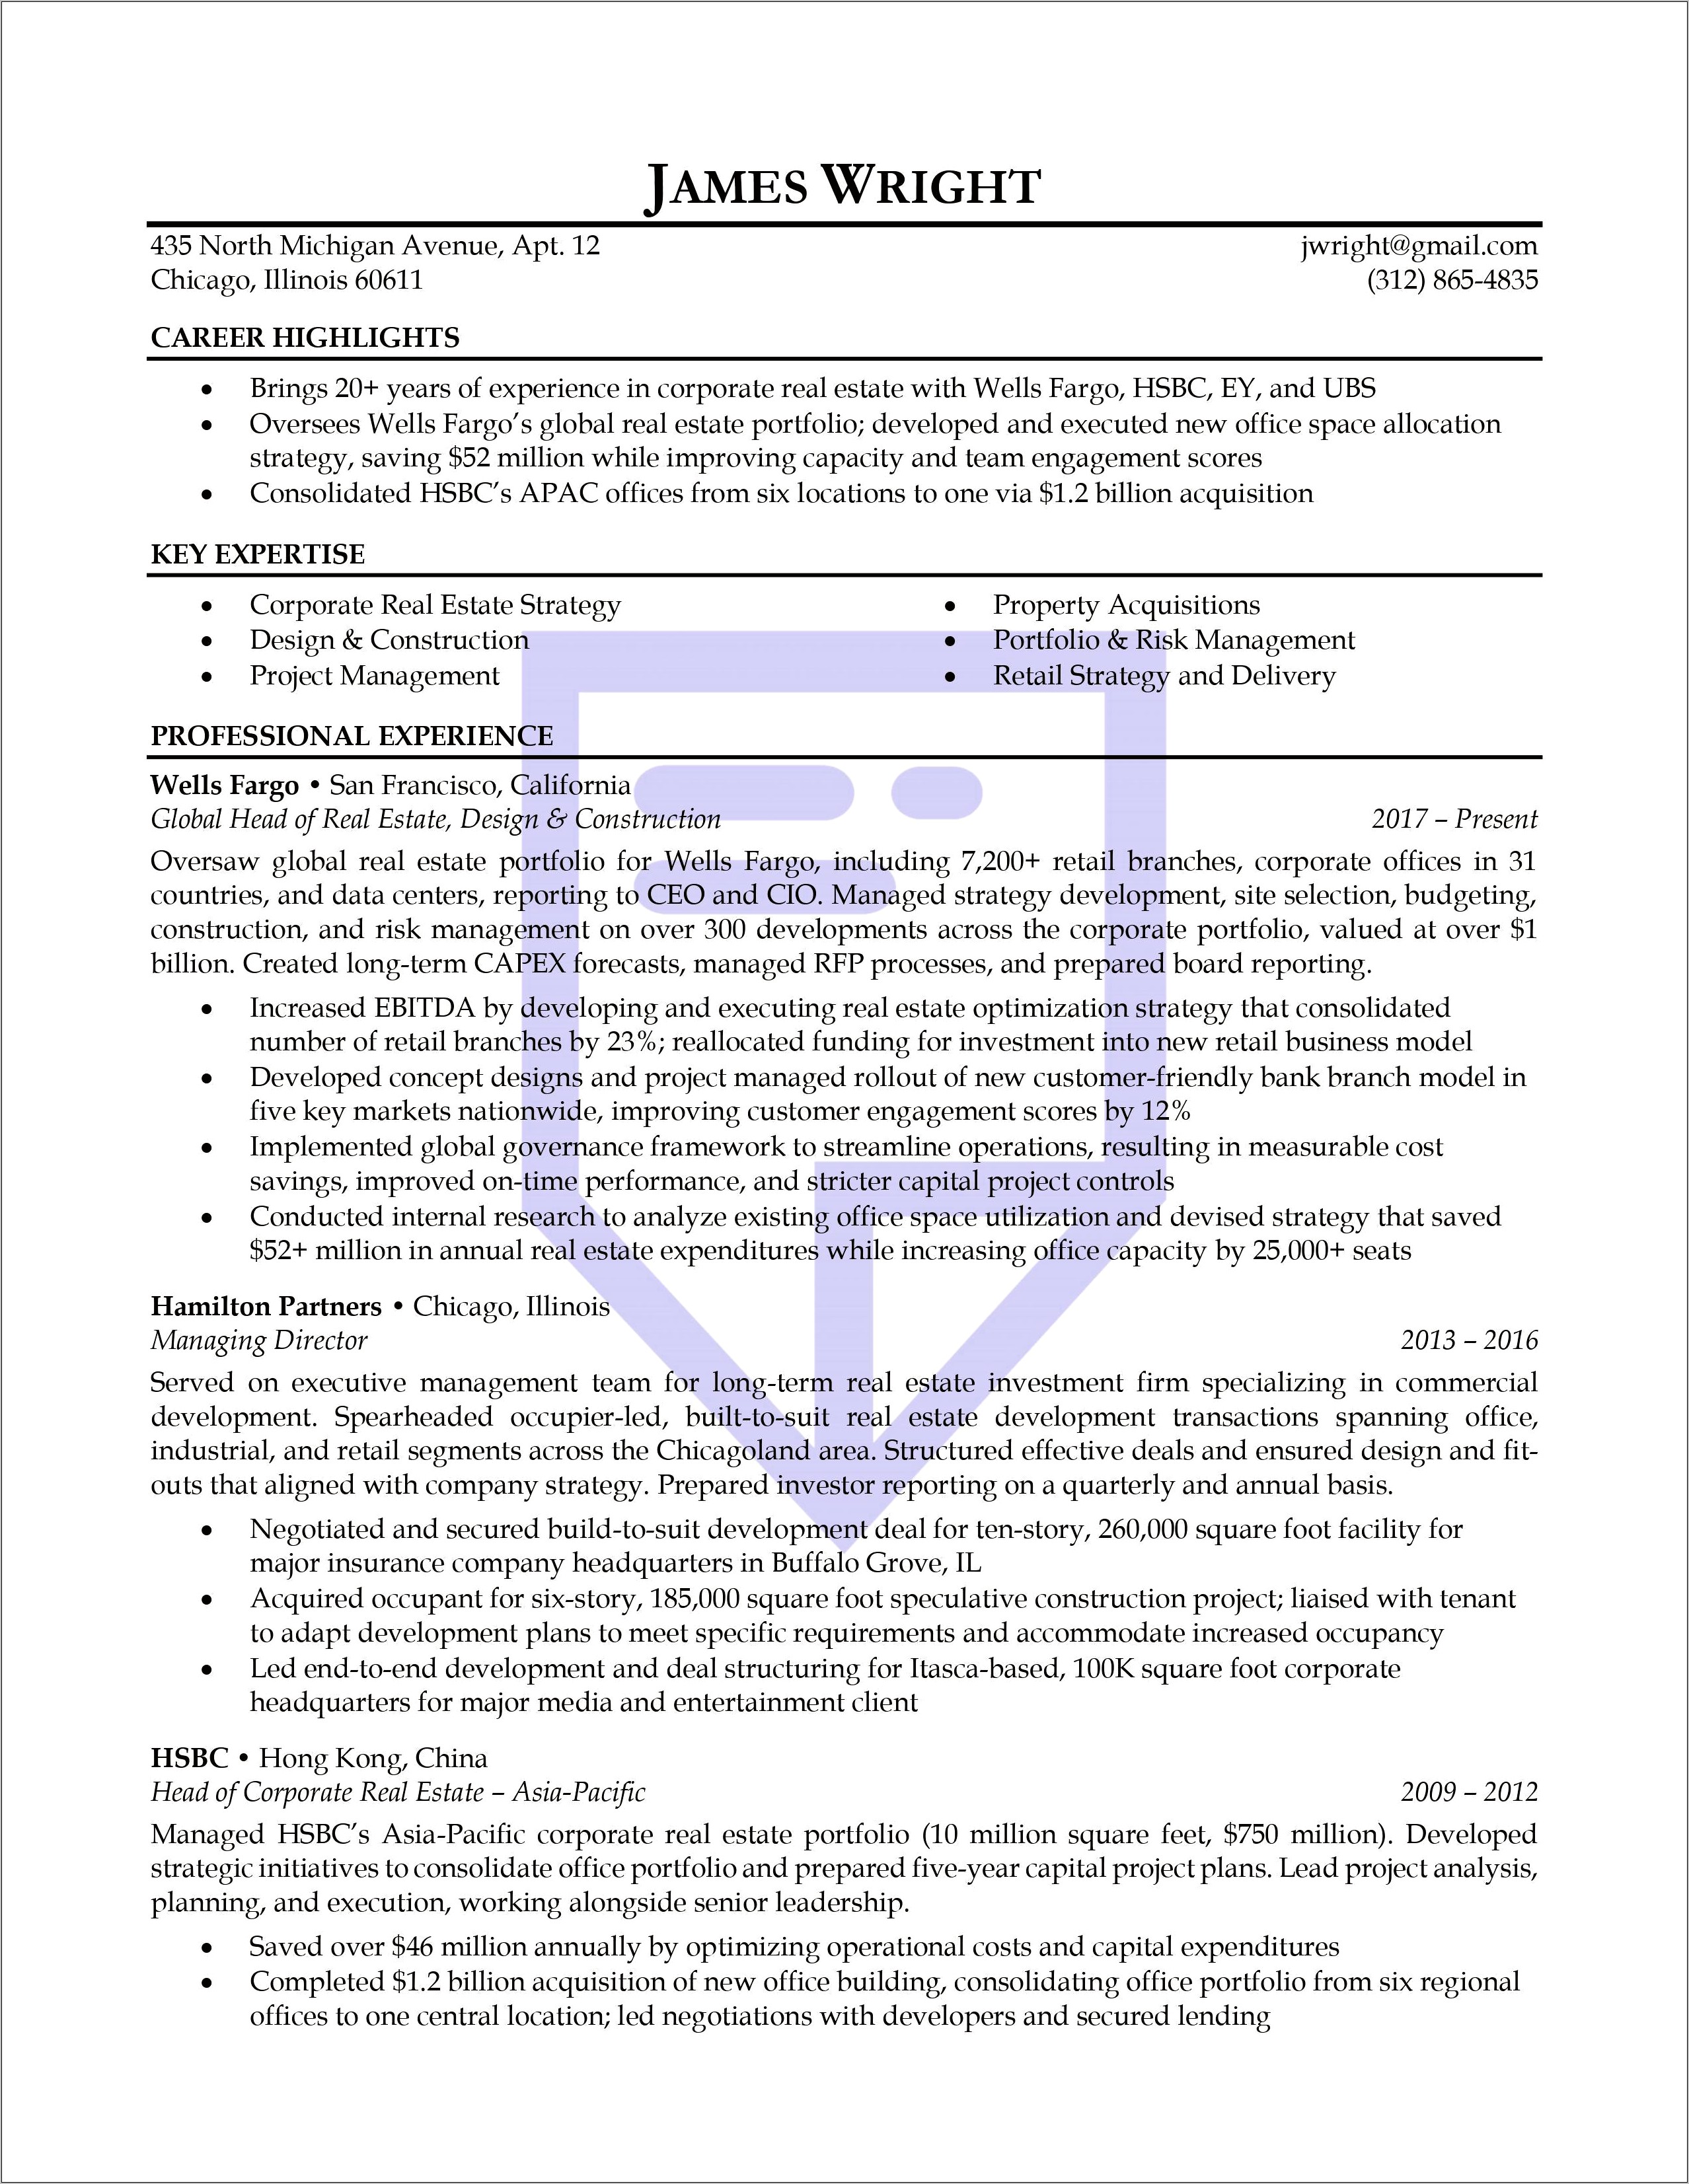 Resume Sample For Director Of Operations